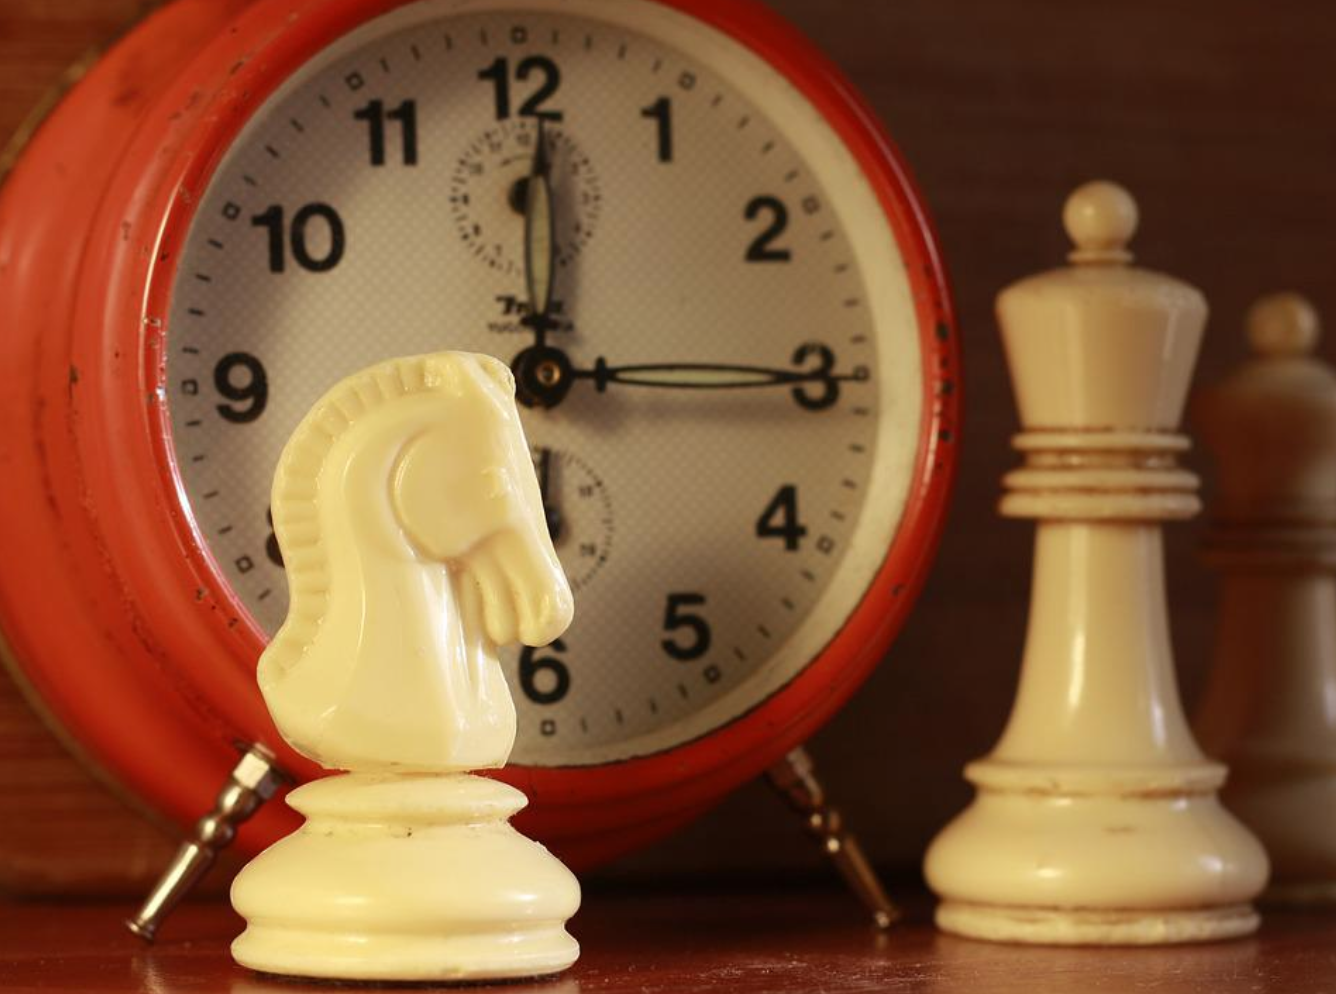 Chess pieces in front of alarm clock; image by Ikaika, via Pixabay.com.